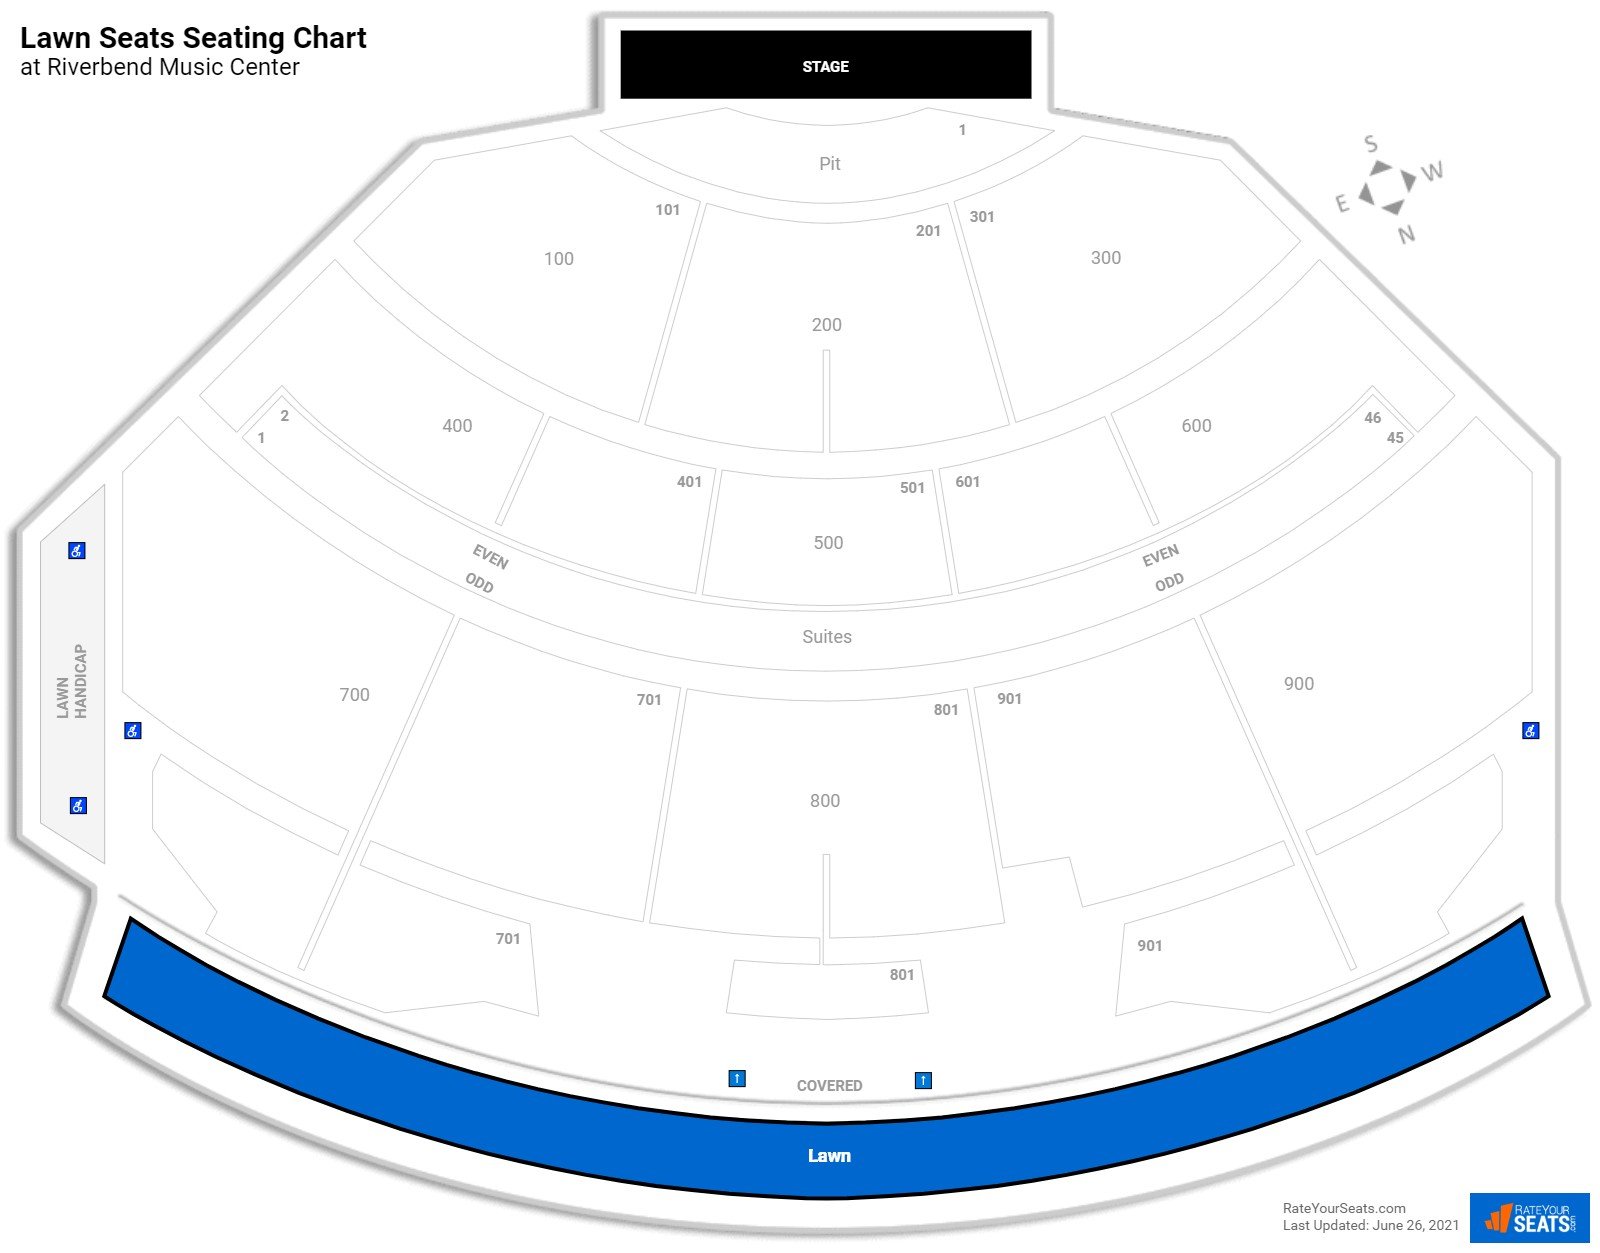 Concert Lawn Seats Seating Chart at Riverbend Music Center